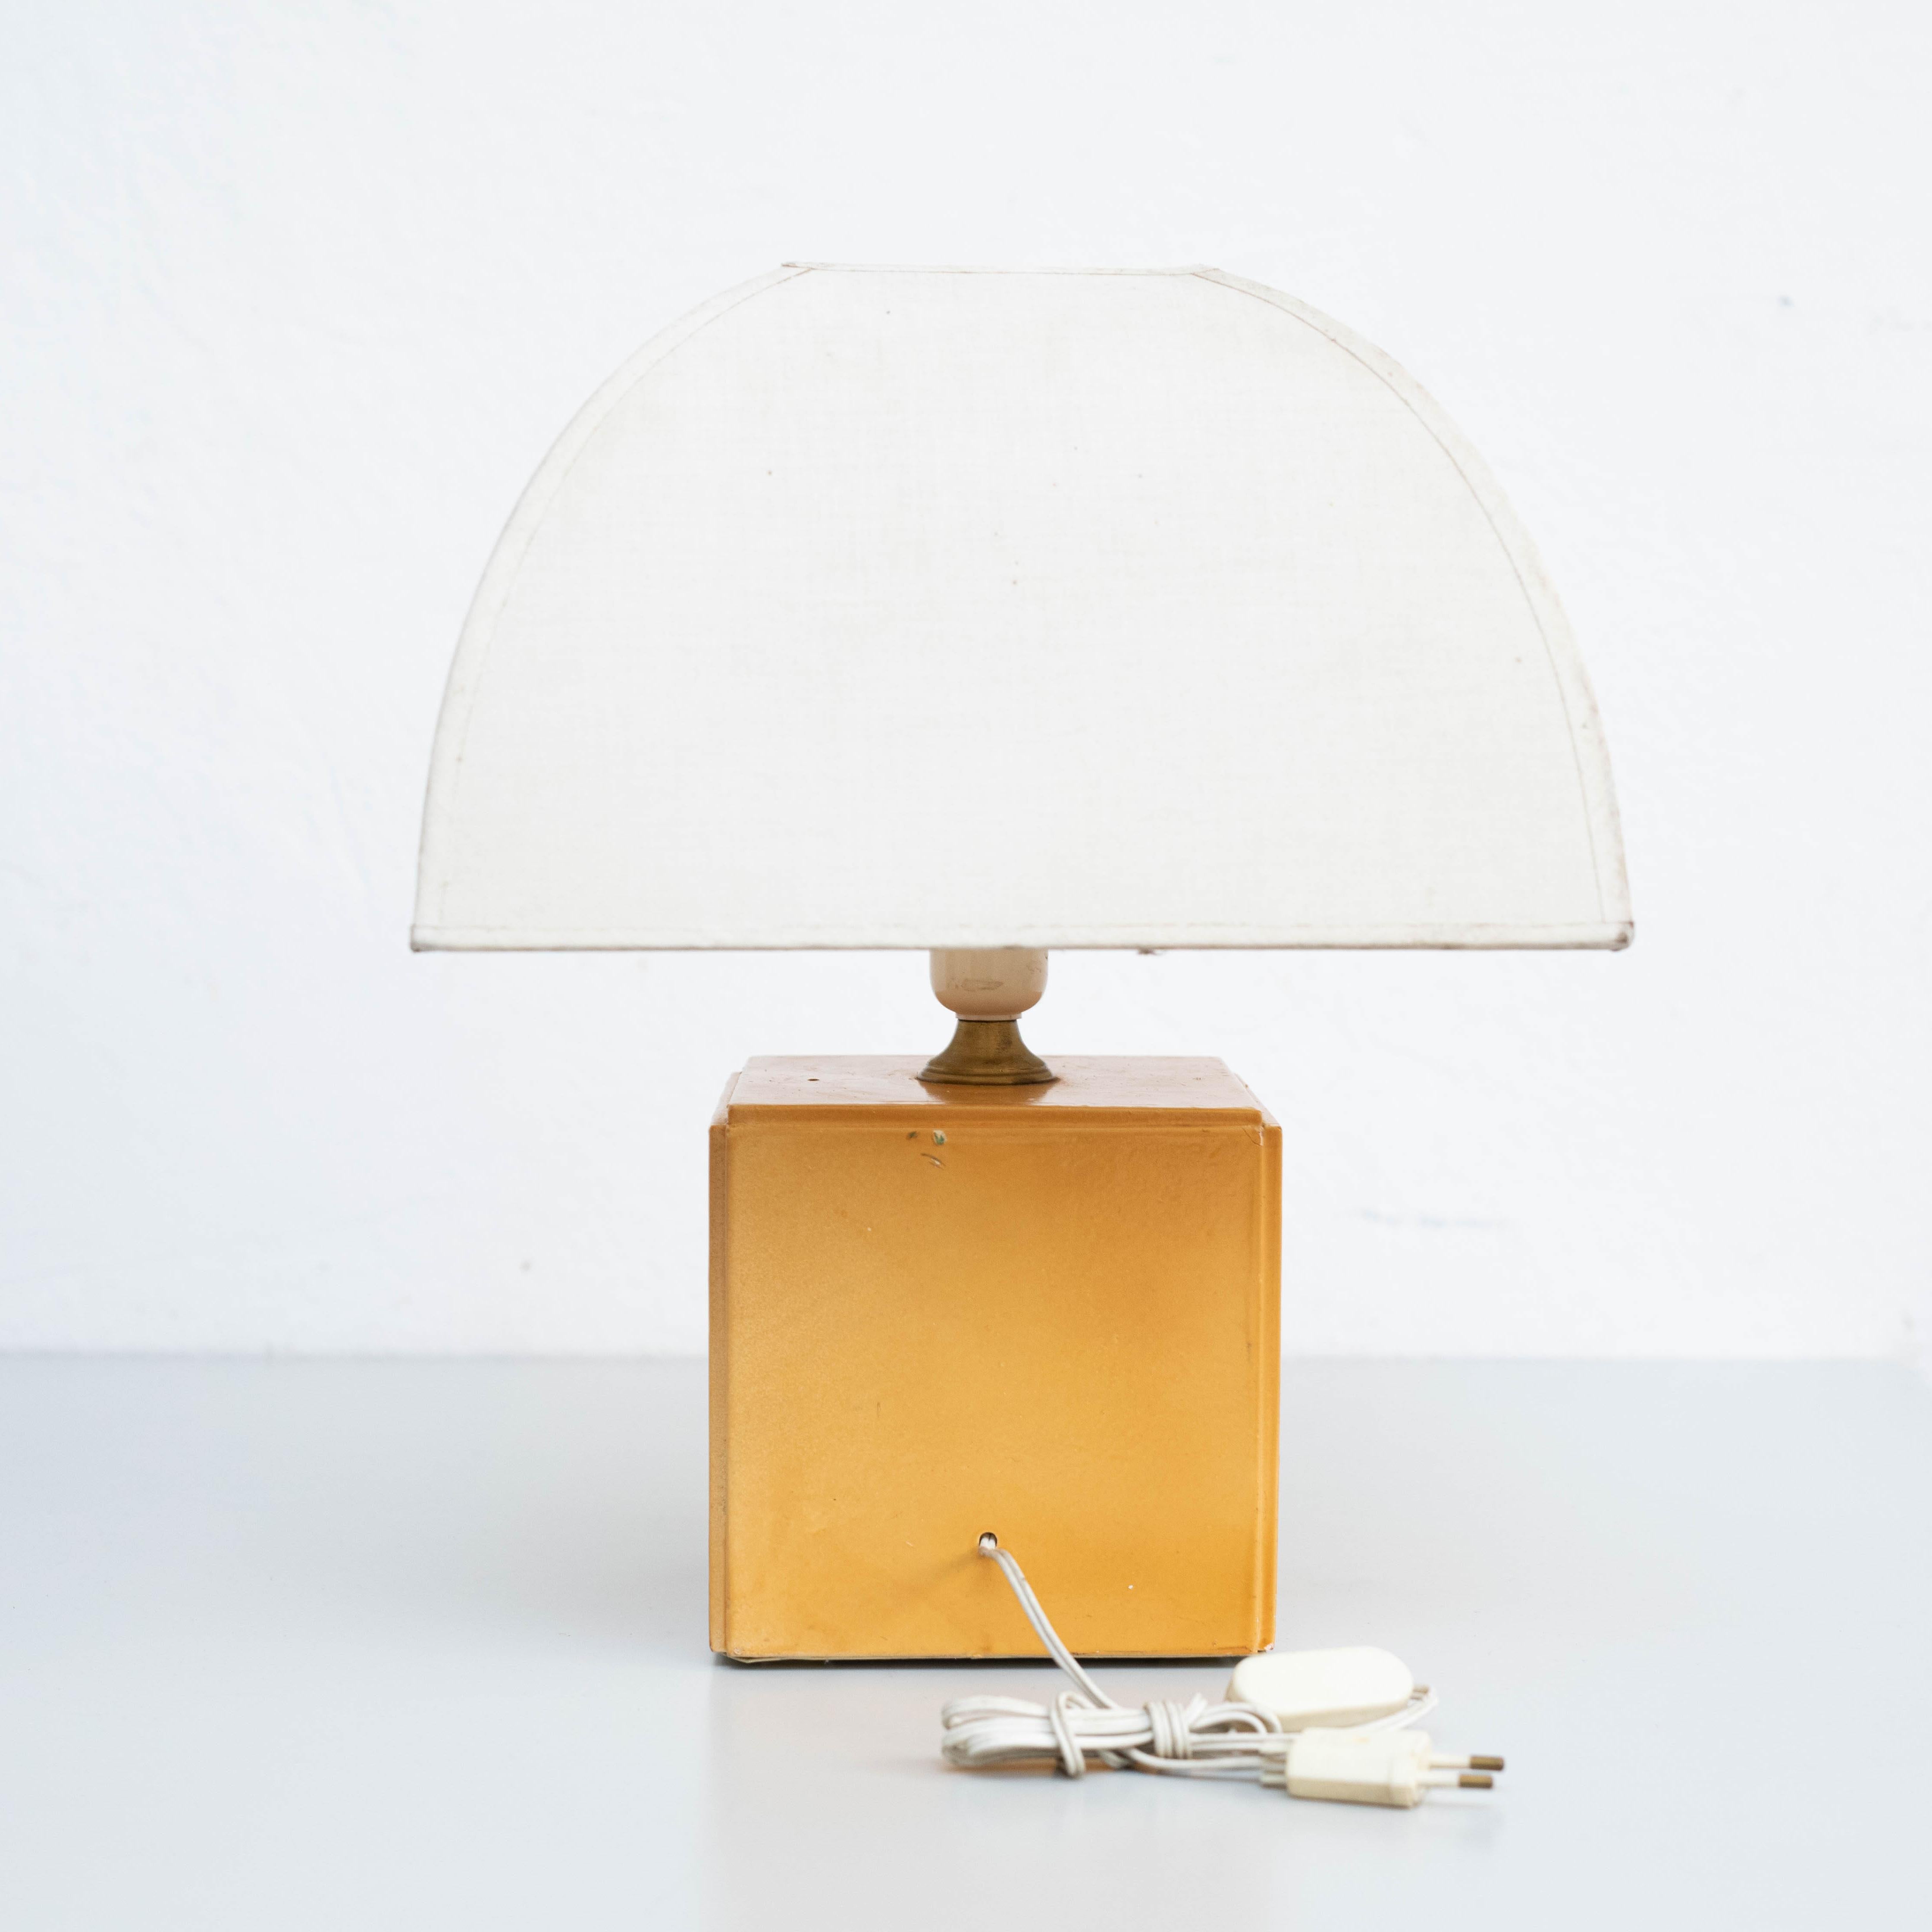 Table lamp, Wood, Circa 1970.

In original condition, wear consistent with age and use, preserving a beautiful patina.

Materials:
Wood

Dimensions:
H 42.5cm
W 31 cm
D 31 cm